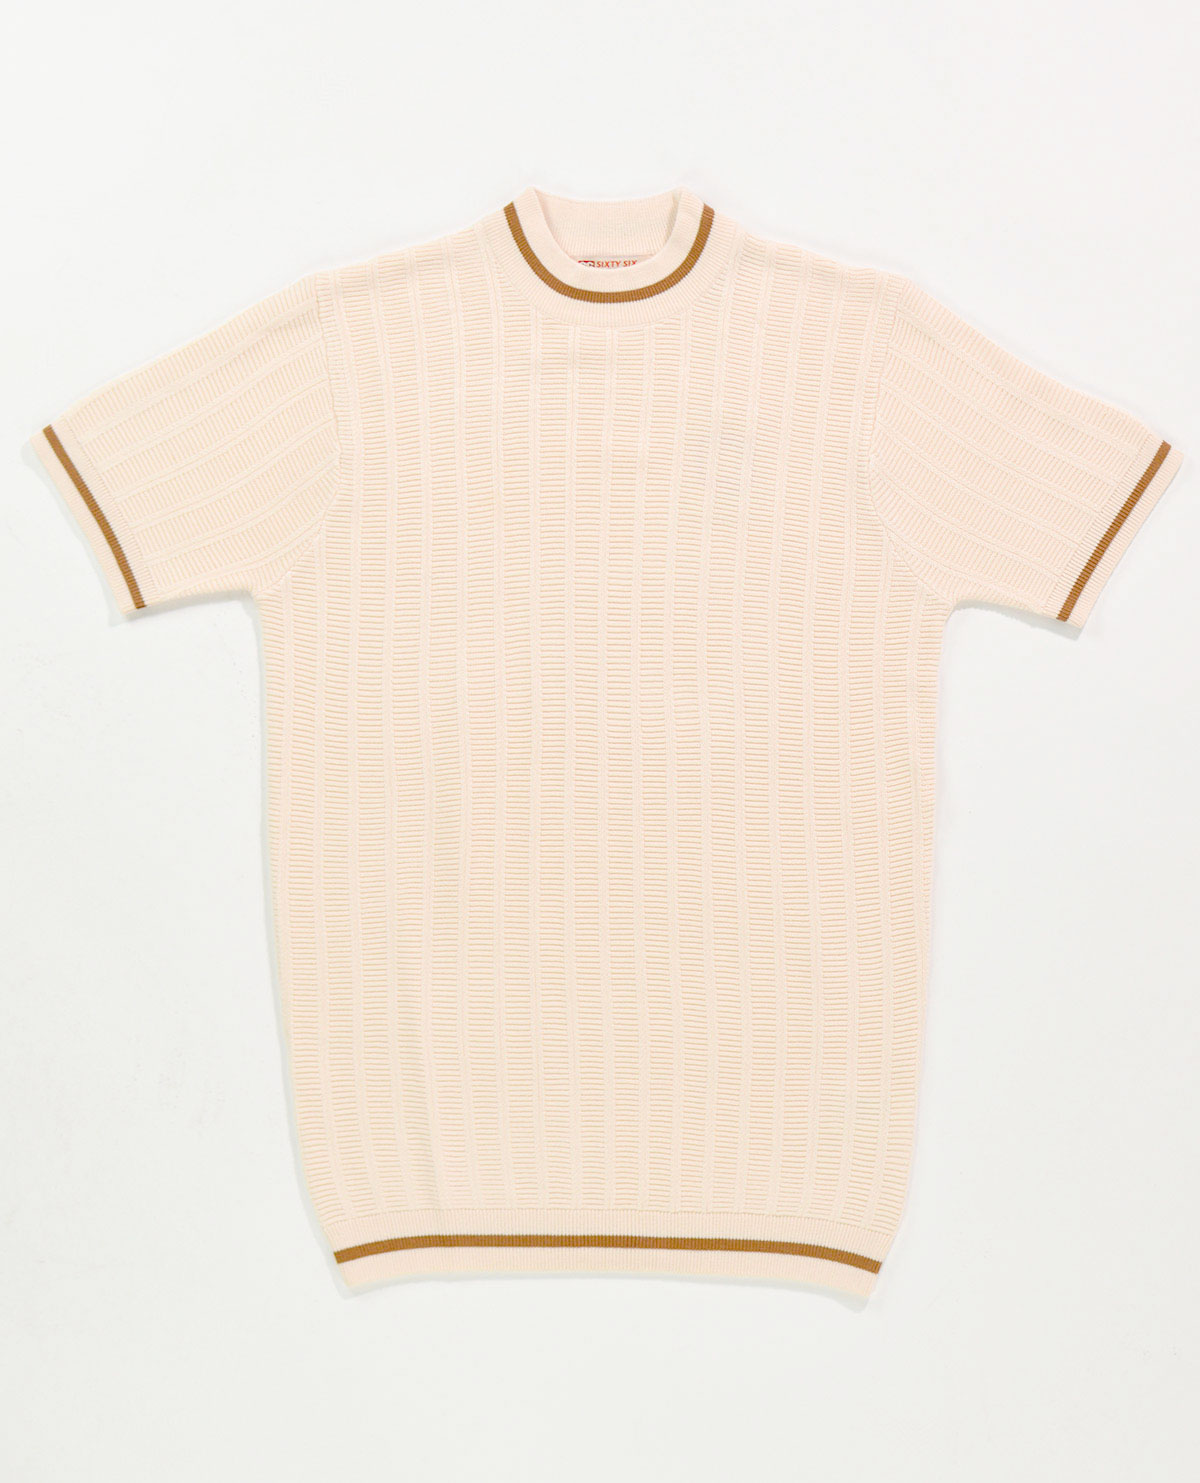 The Carl V2 – Buttercream & Pecan Textured Stripe Crew Neck by 66 ...